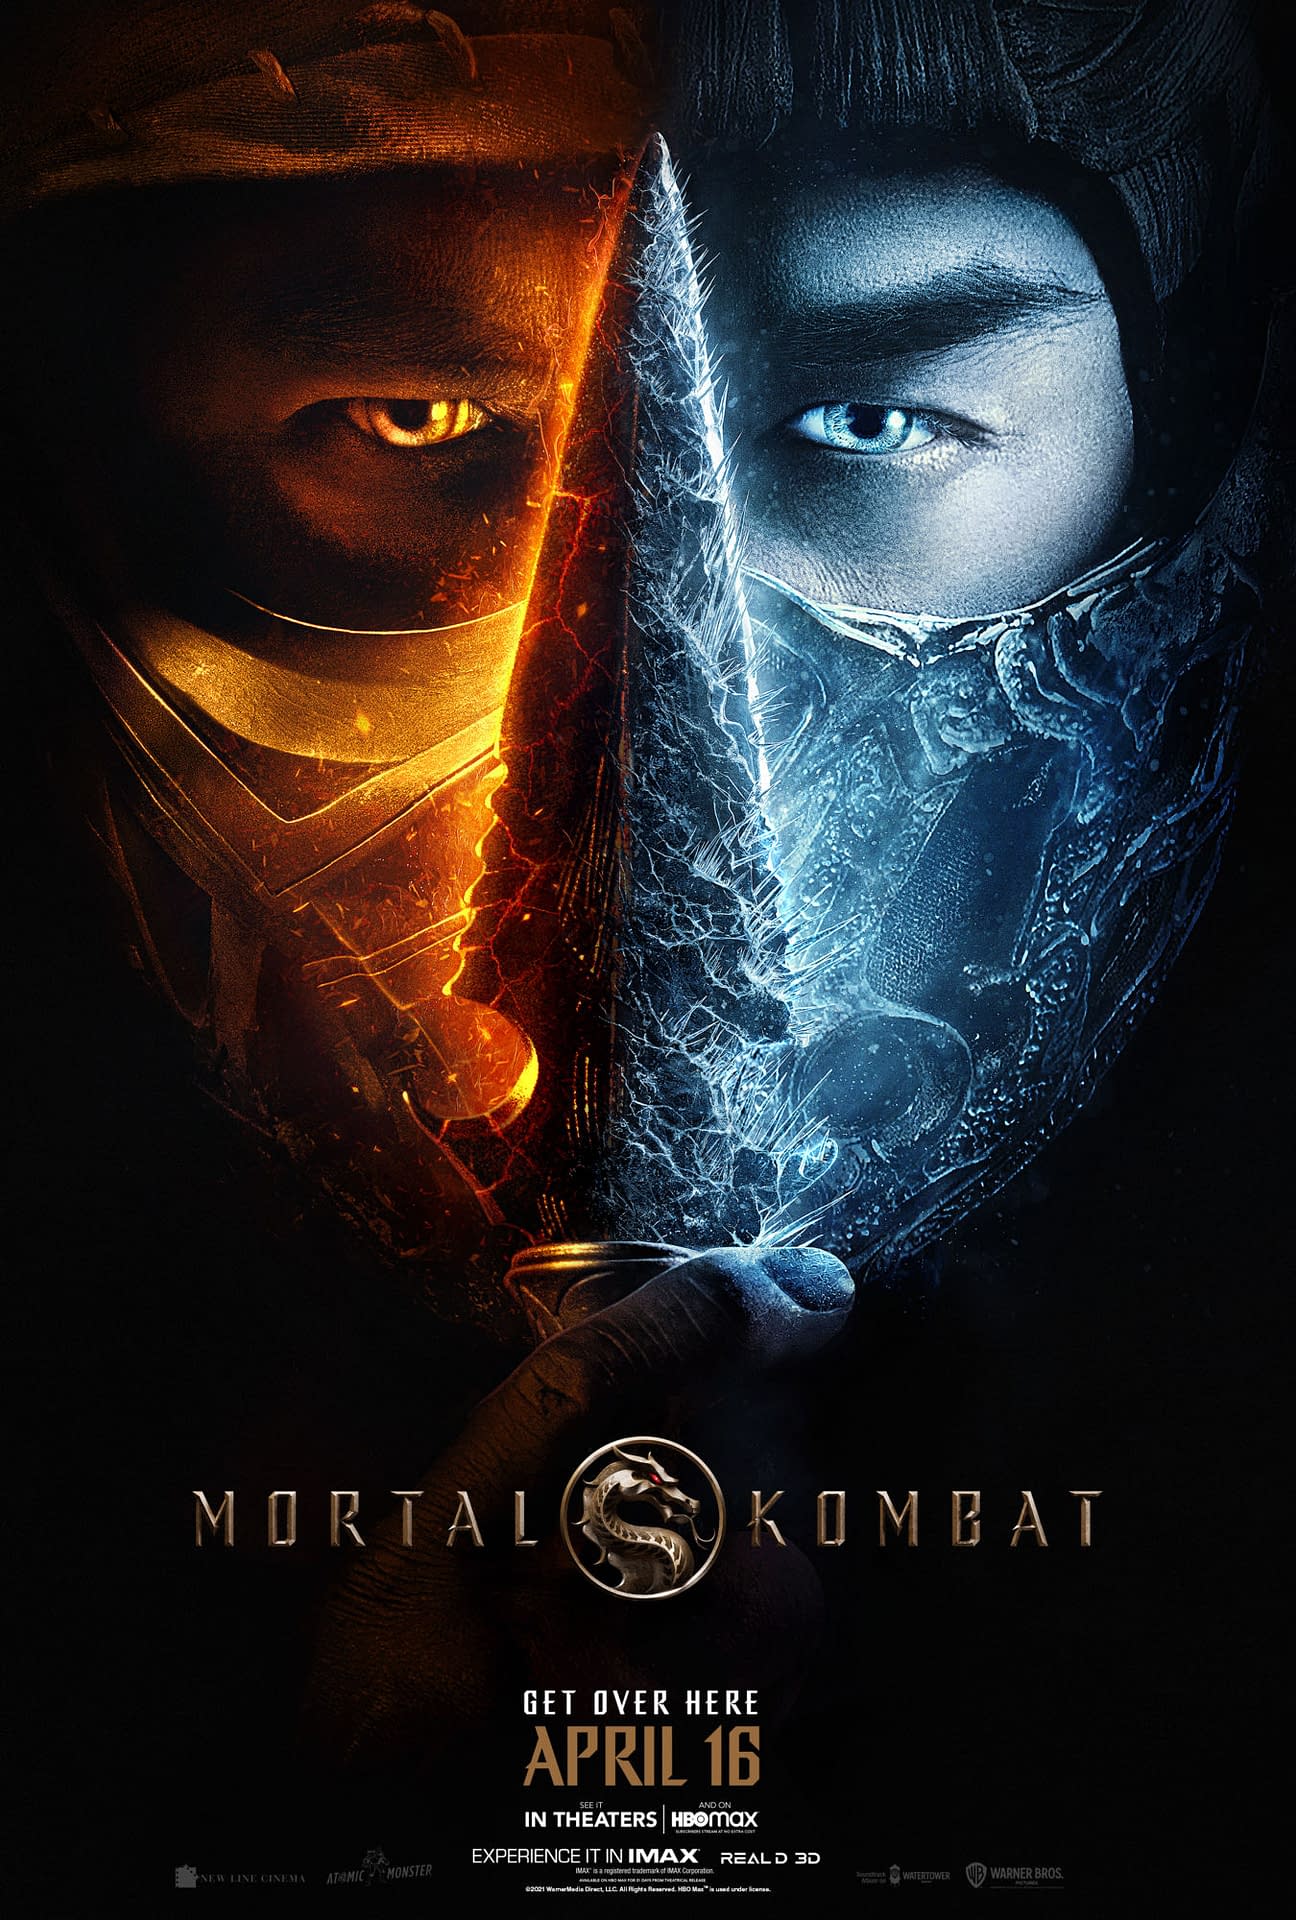 Mortal Kombat: A New Poster and 8 New